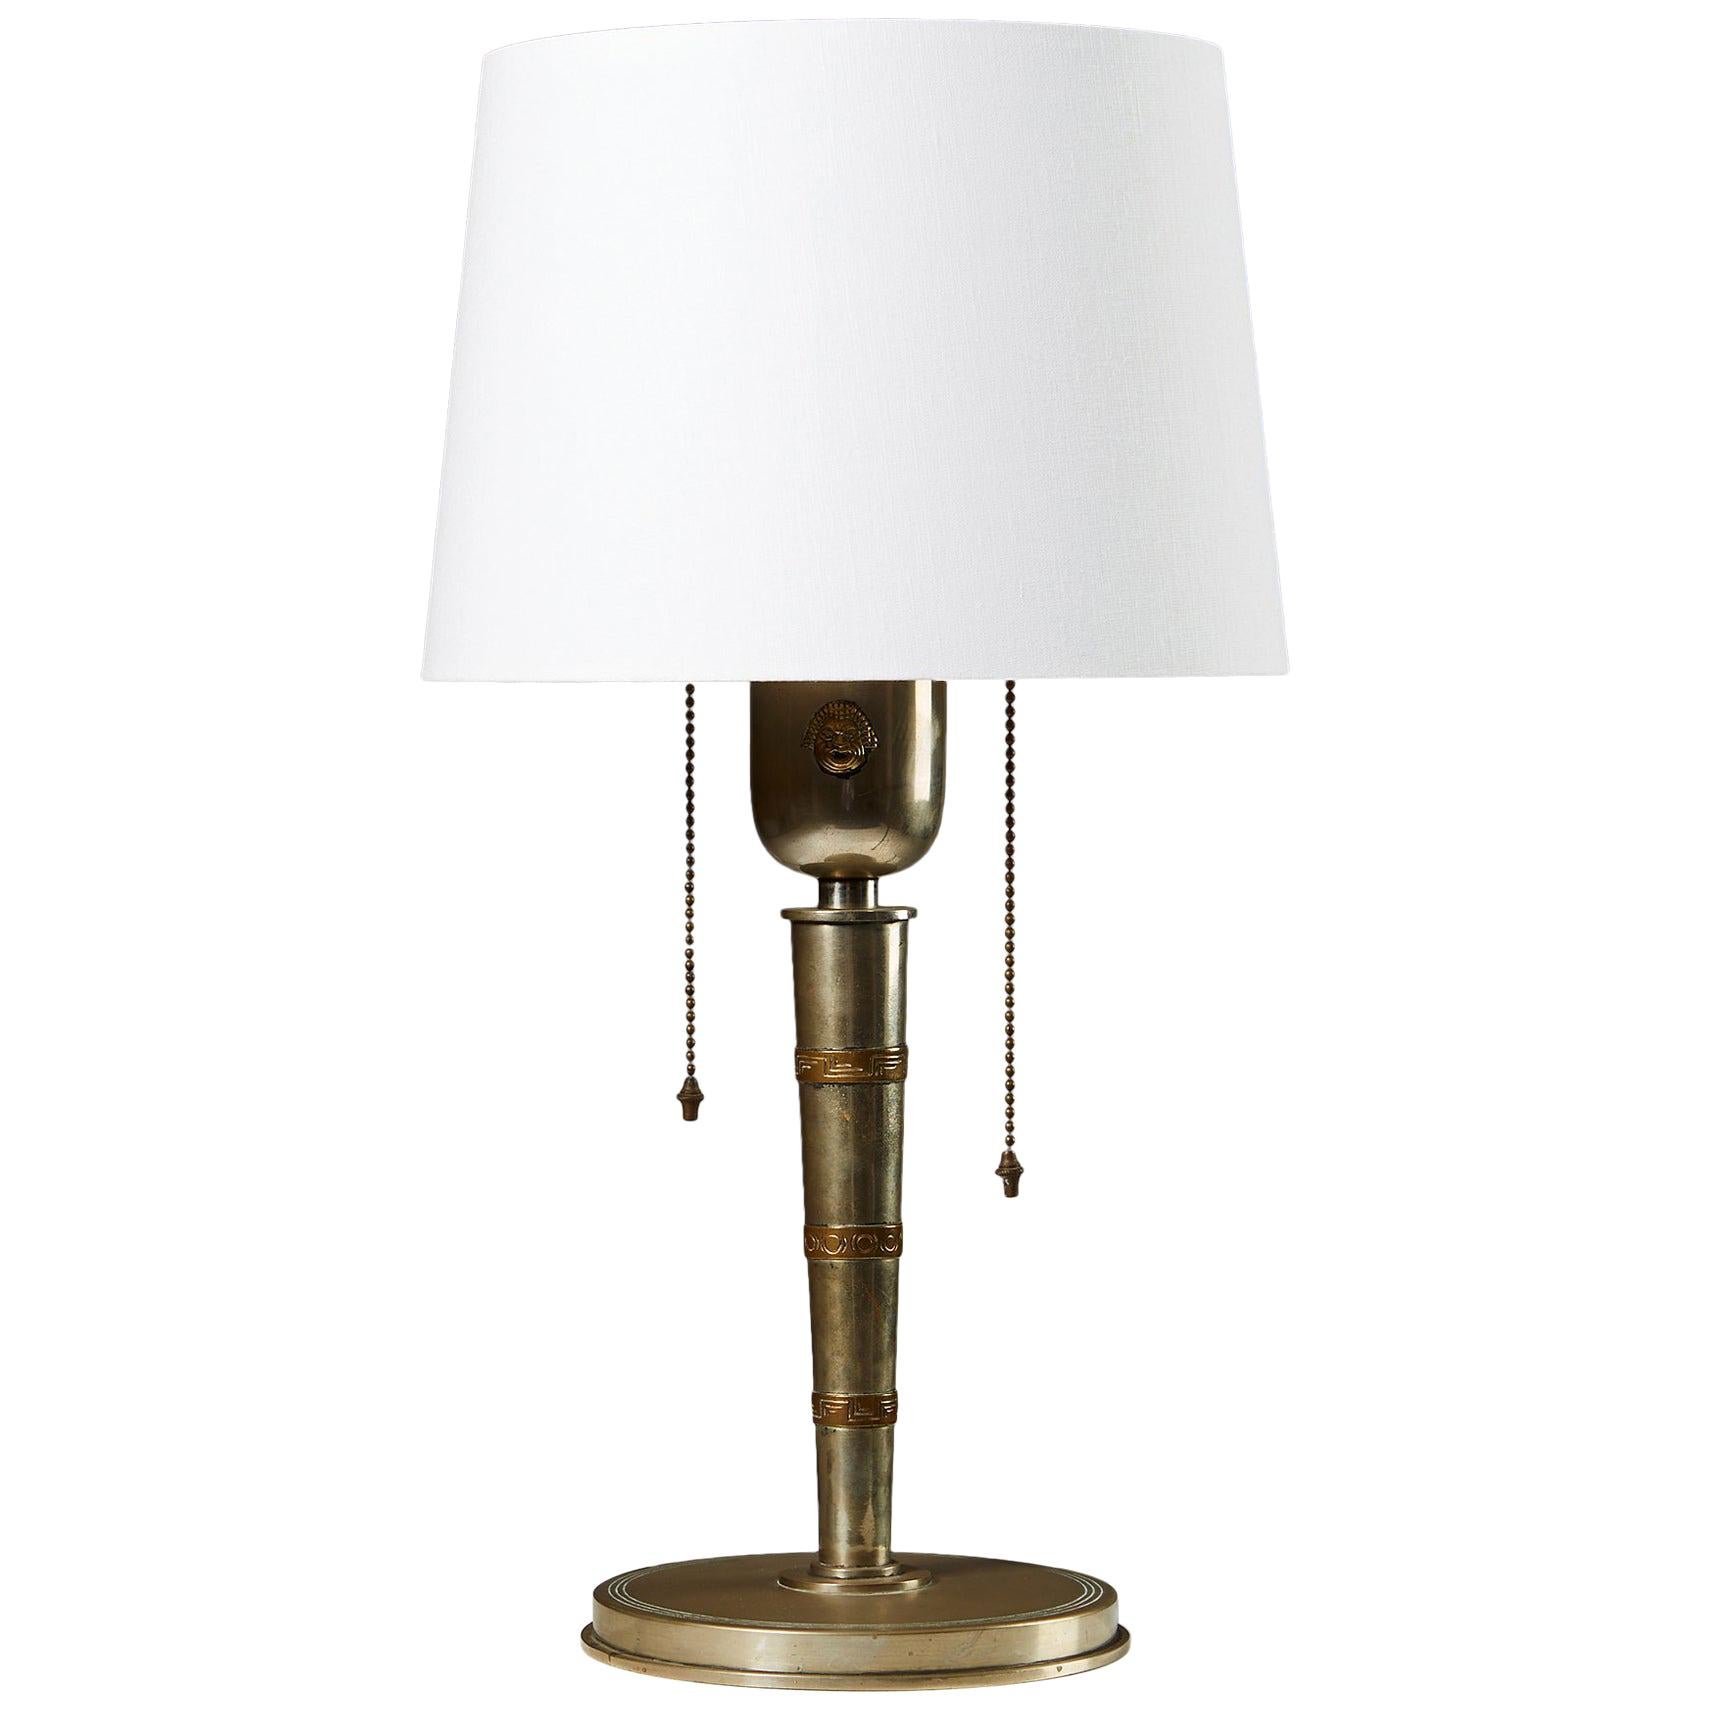 Table Lamp Designed by Tore Kullander, Pewter and Brass, Sweden, 1930s